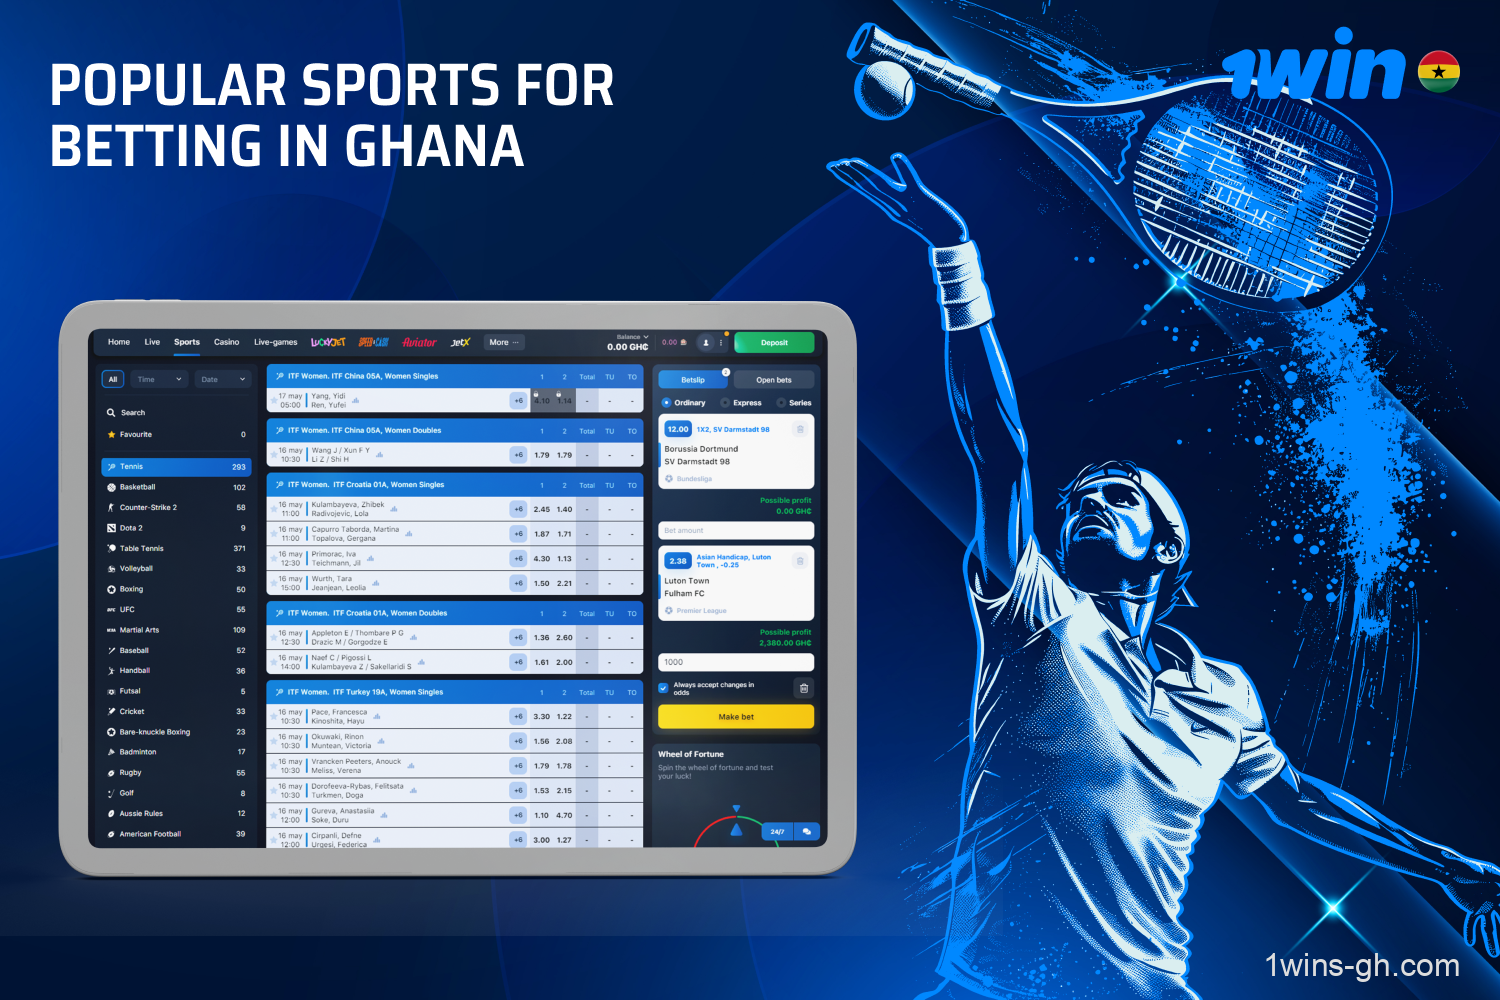 Sports betting is popular among Ghanaian punters at 1win